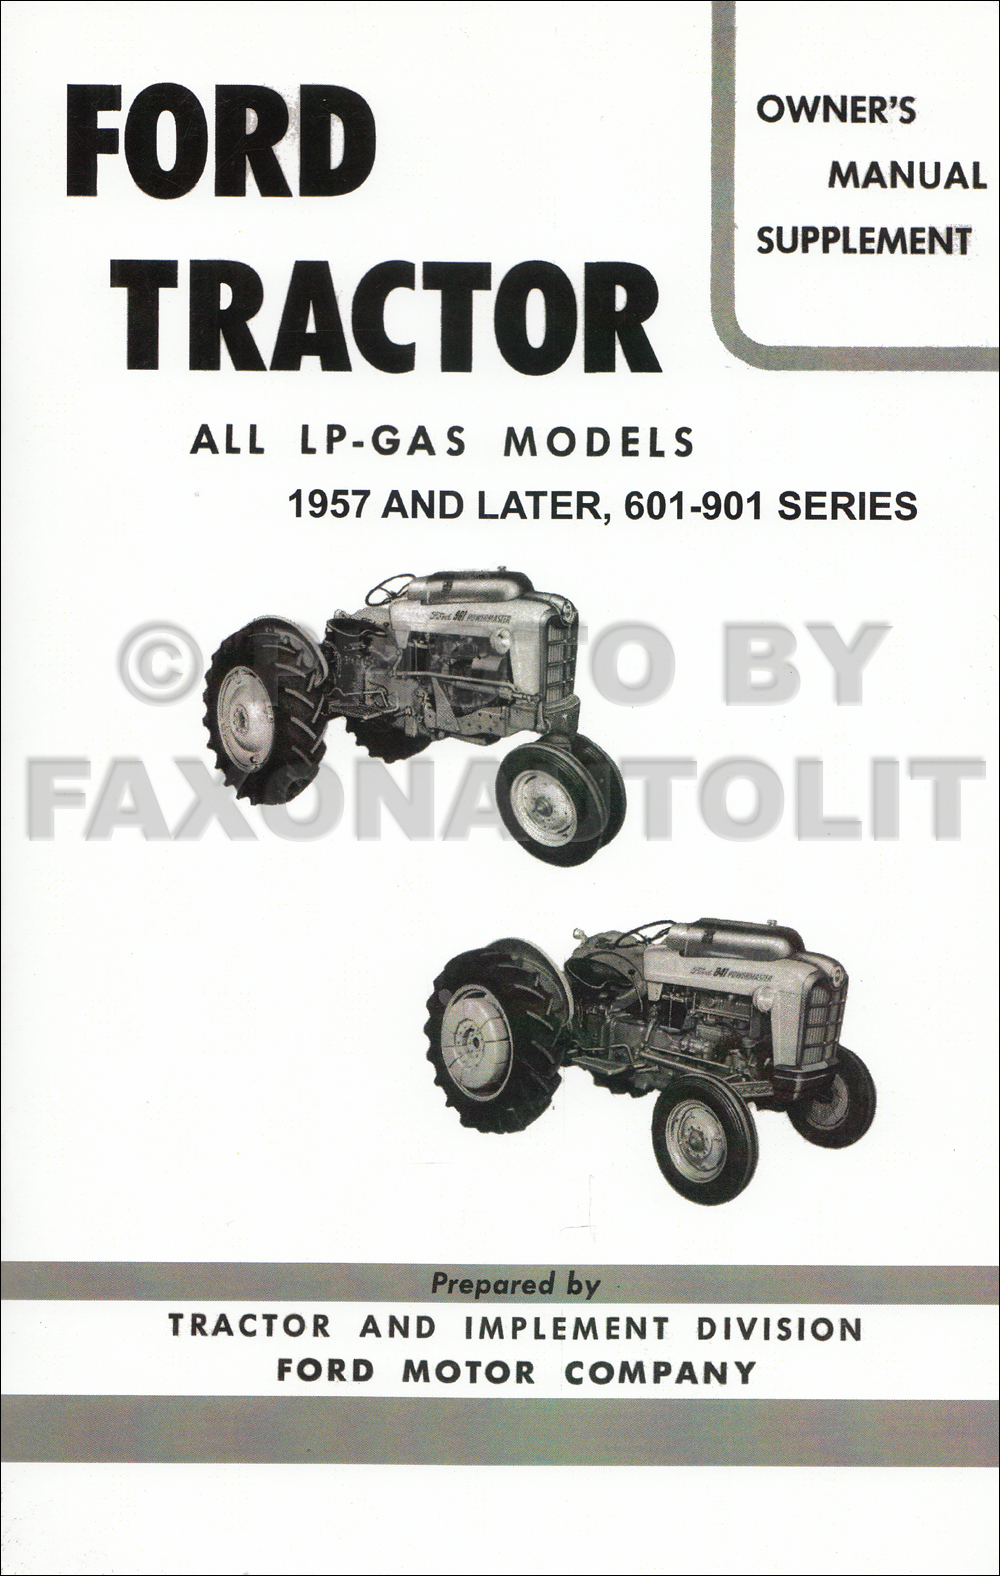 1957-1962 Ford LP-Gas Tractor Owners Manual Supplement Reprint